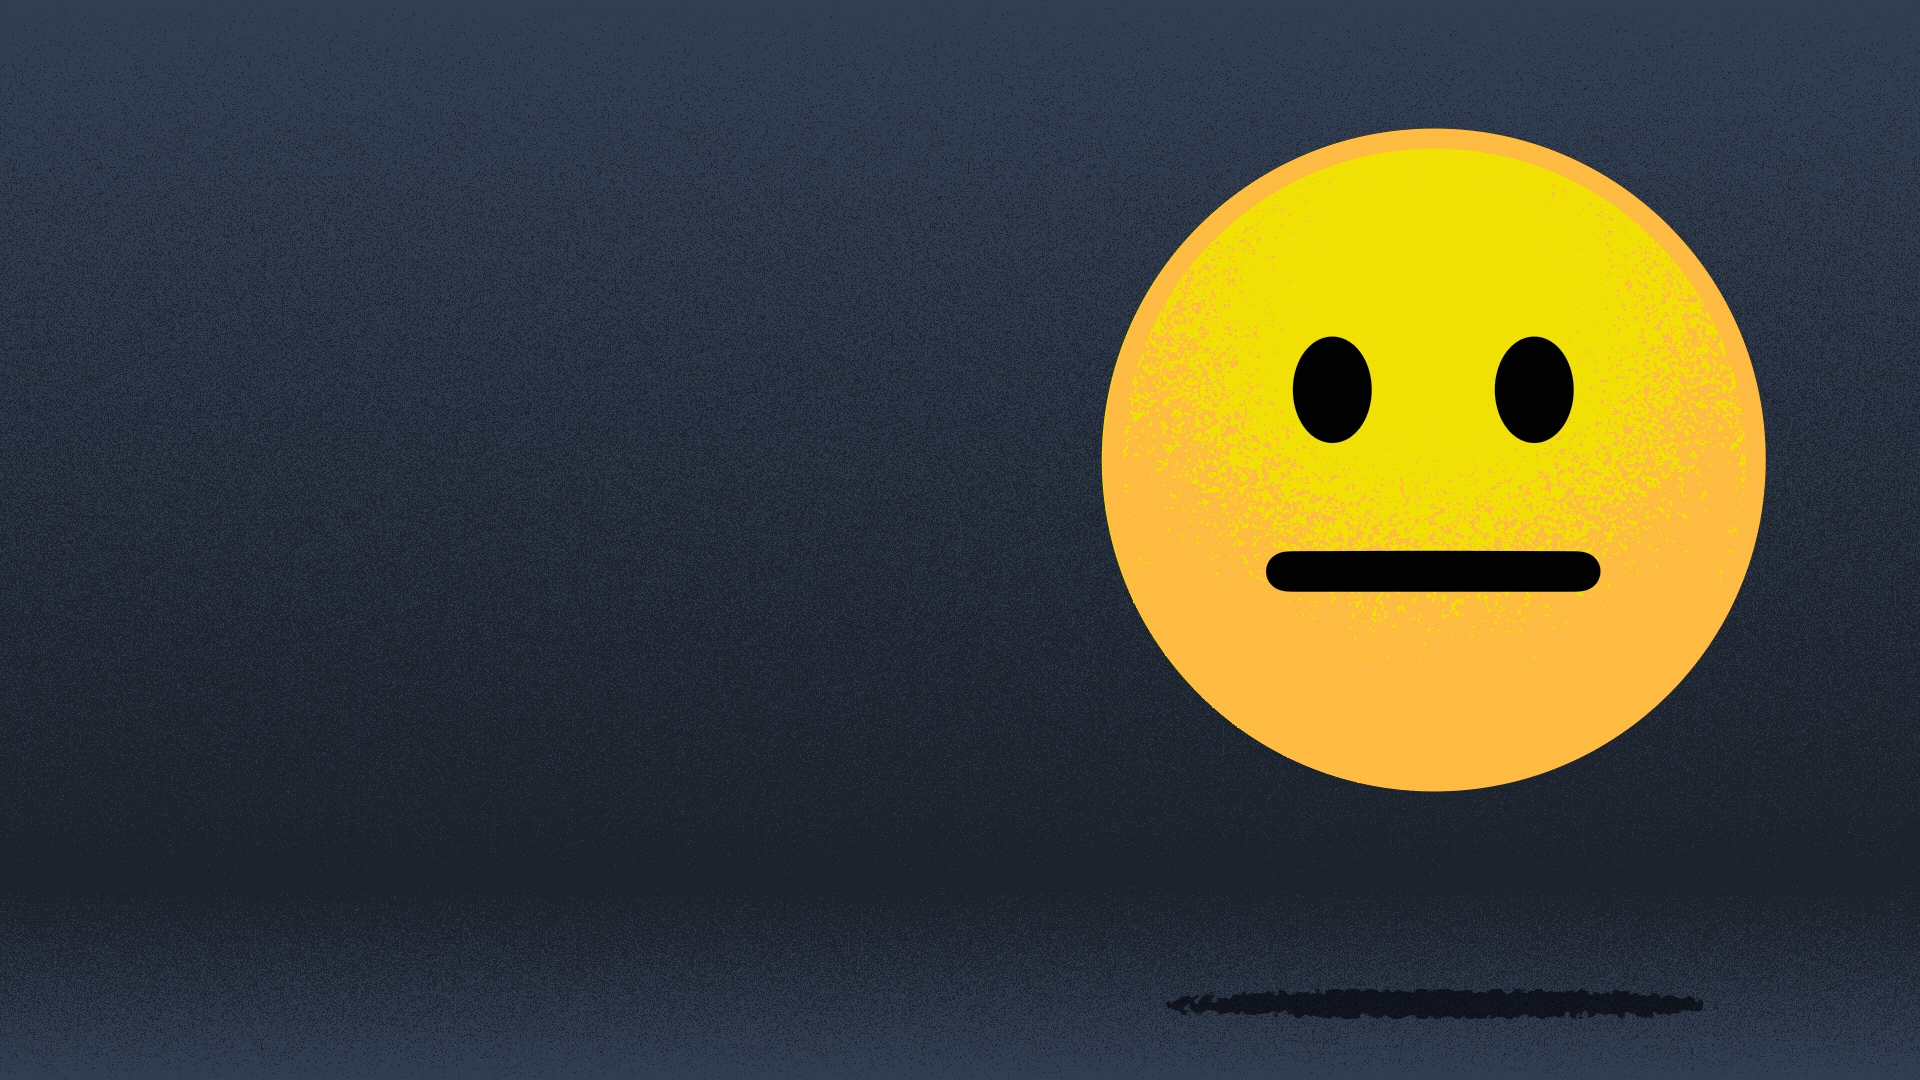 Animated illustration of an emoji with a neutral face that turns into a bored face when its surrounded by binary code.